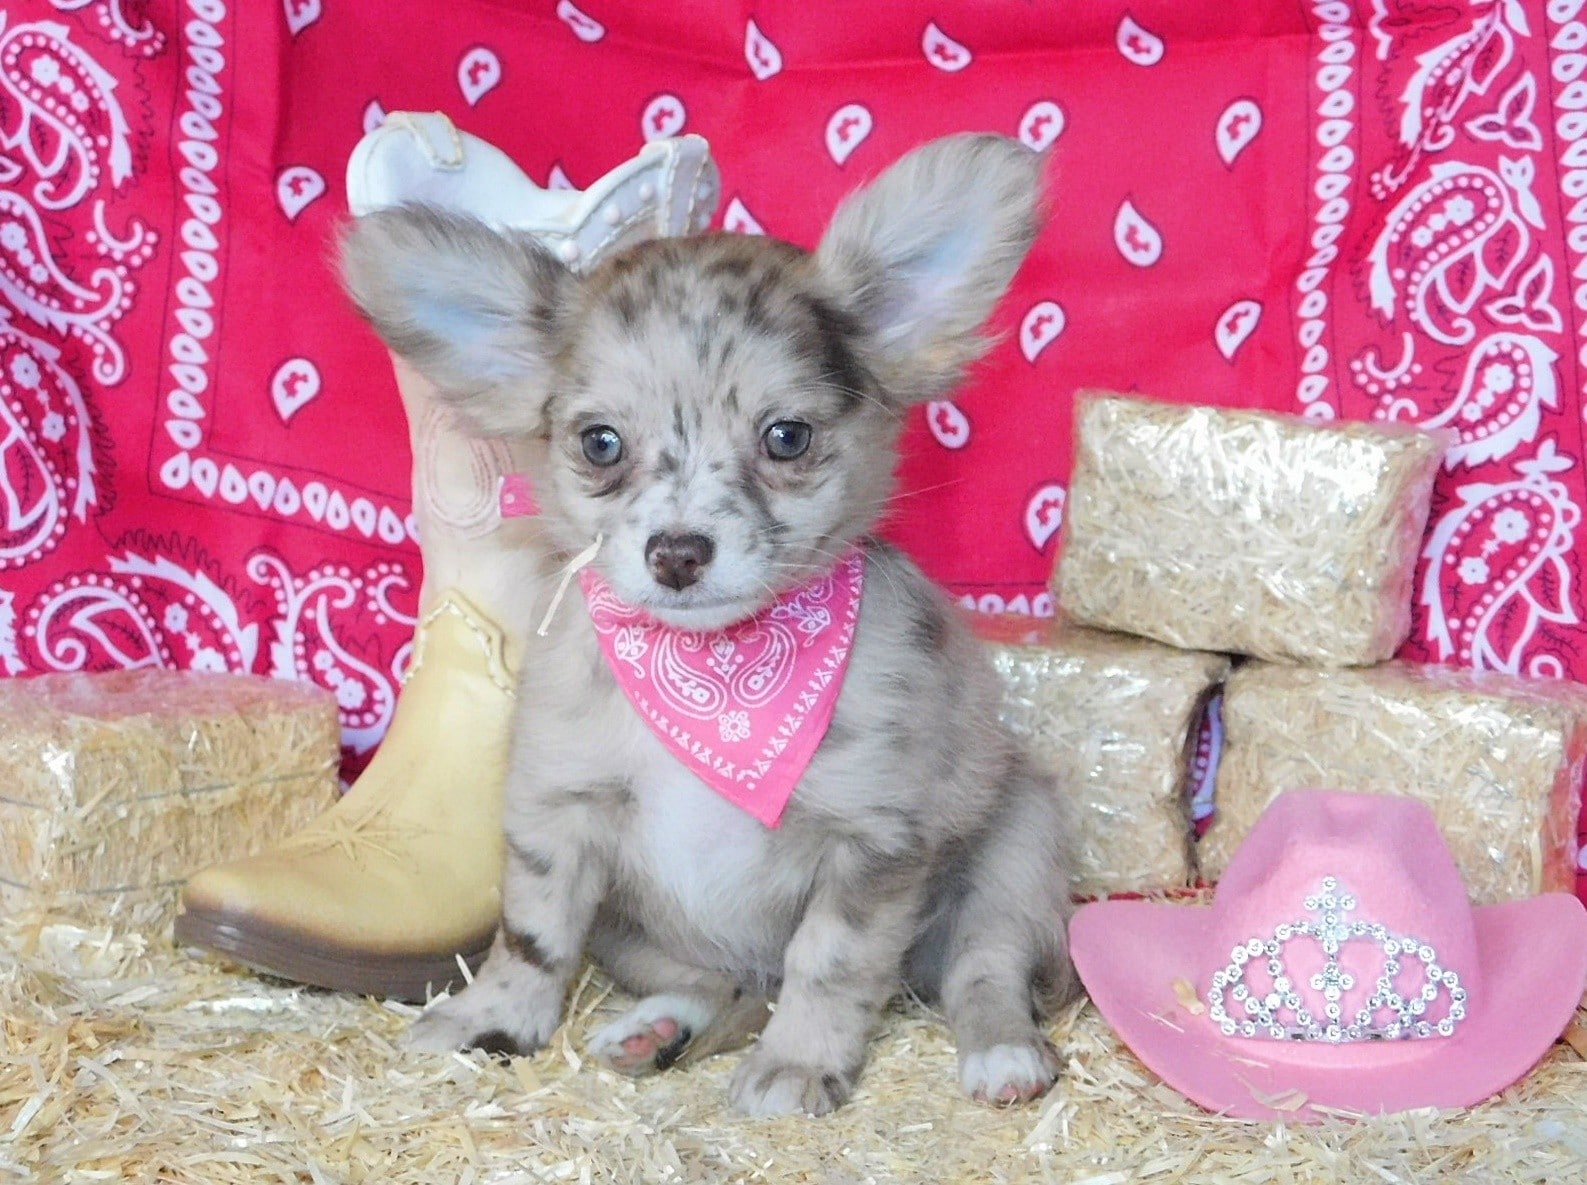 Chihuahua puppies for sale
Long coat chihuahua puppies for sale in Charleston, Arkansas